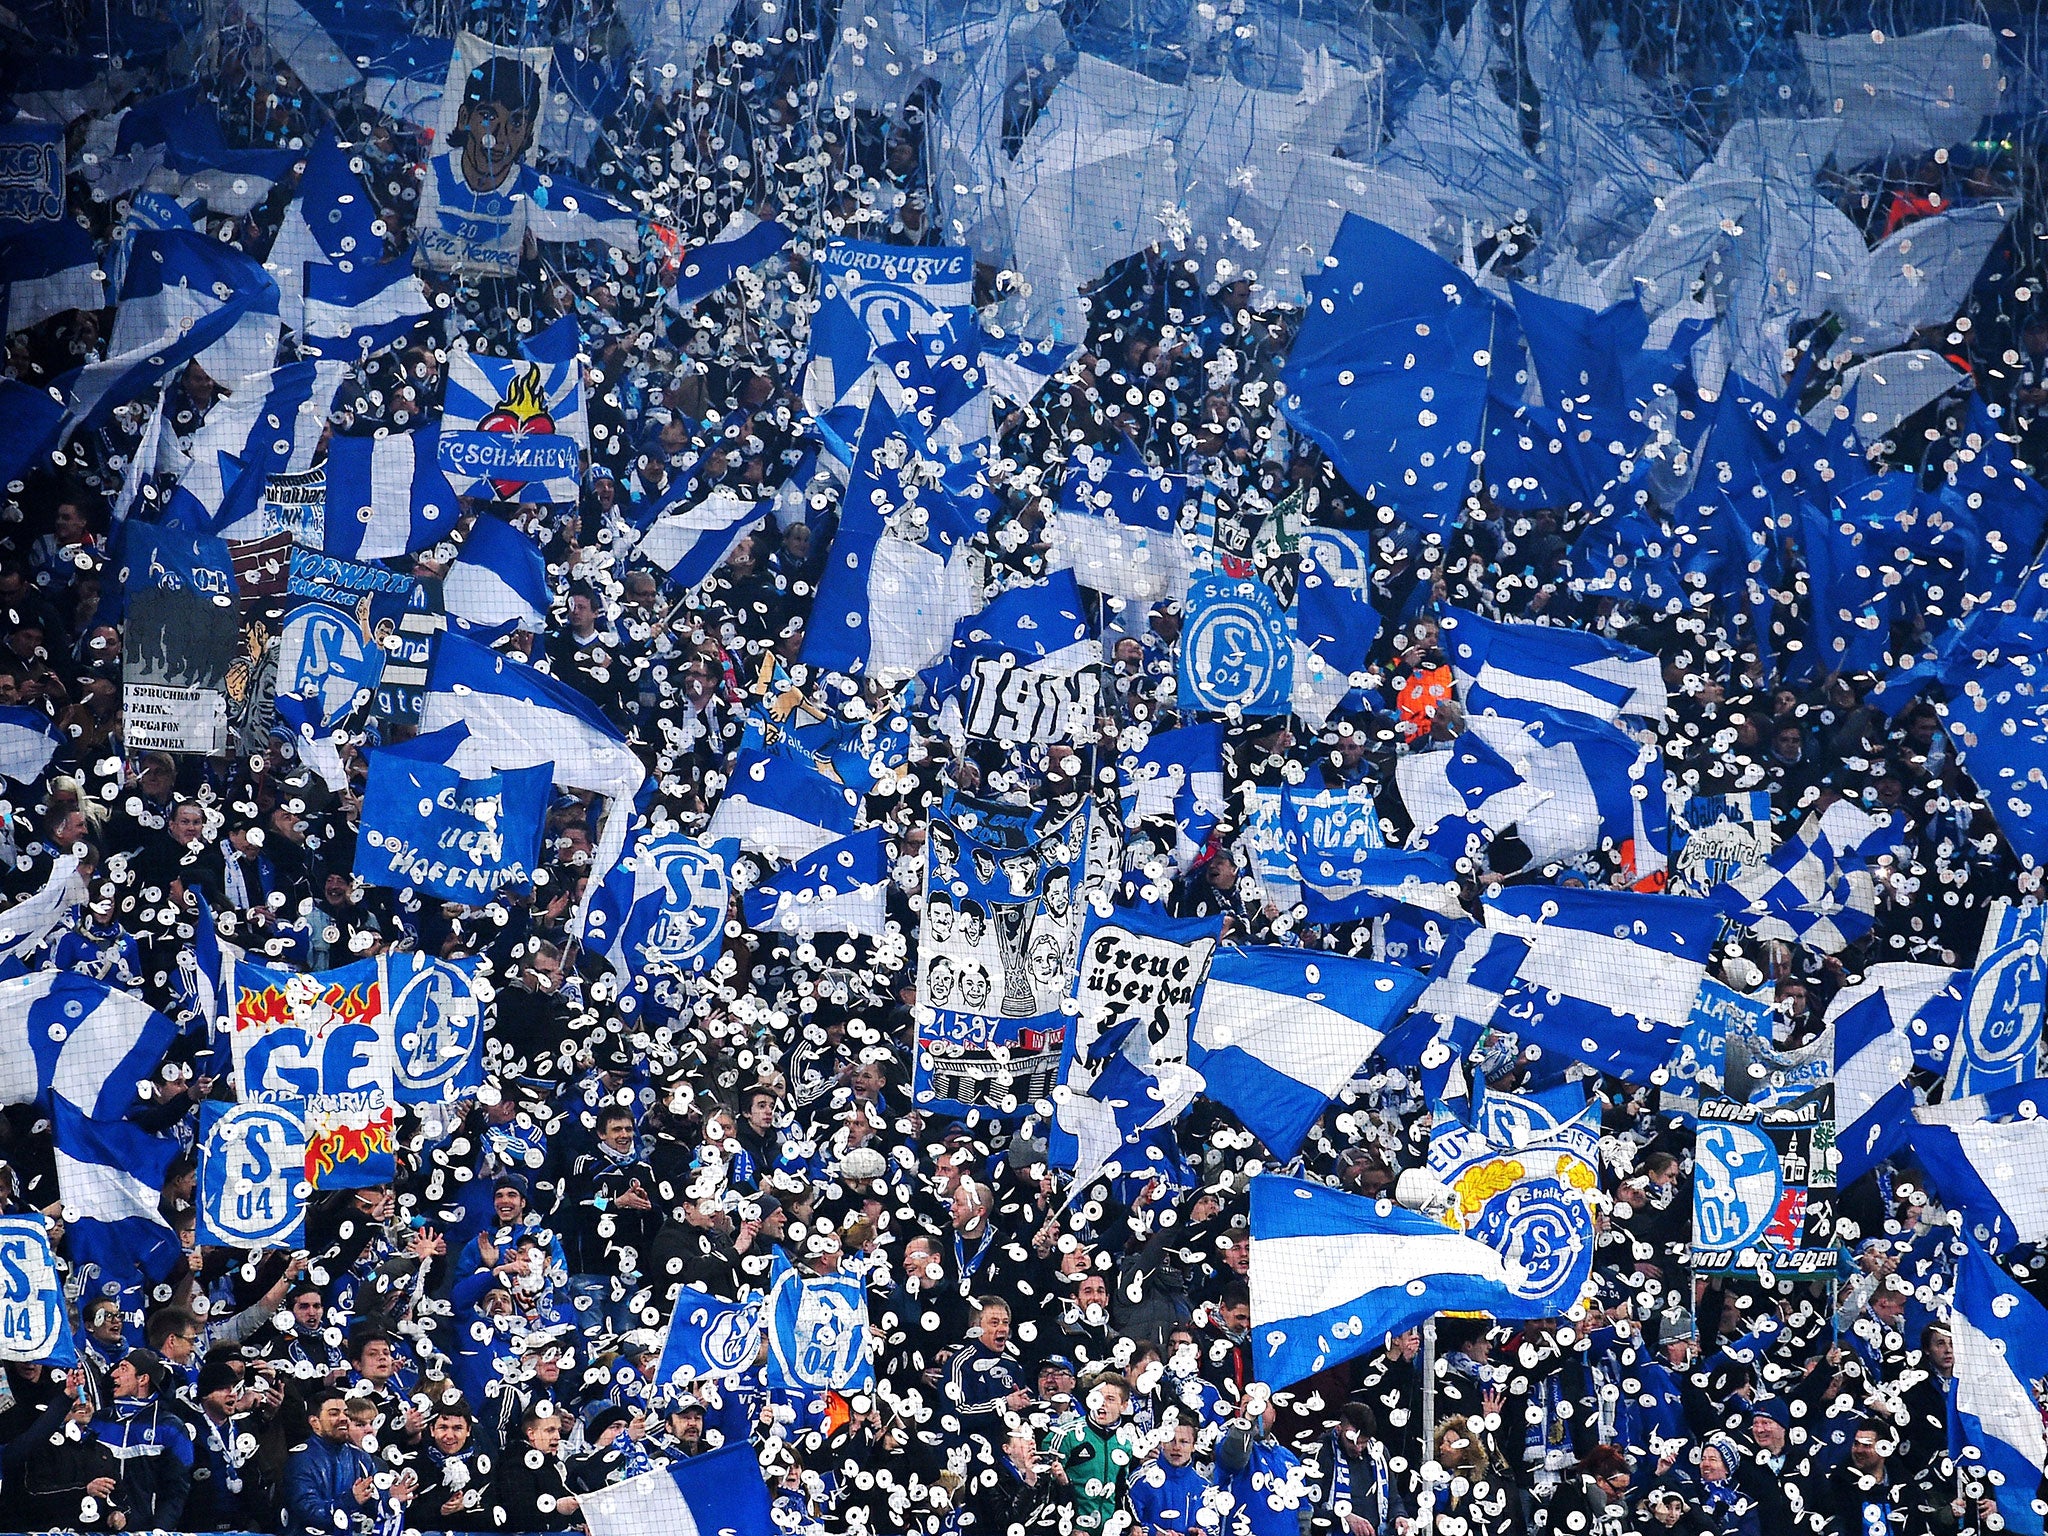 Schalke fans cheer on the team ahead of their Champions League clash with Real Madrid